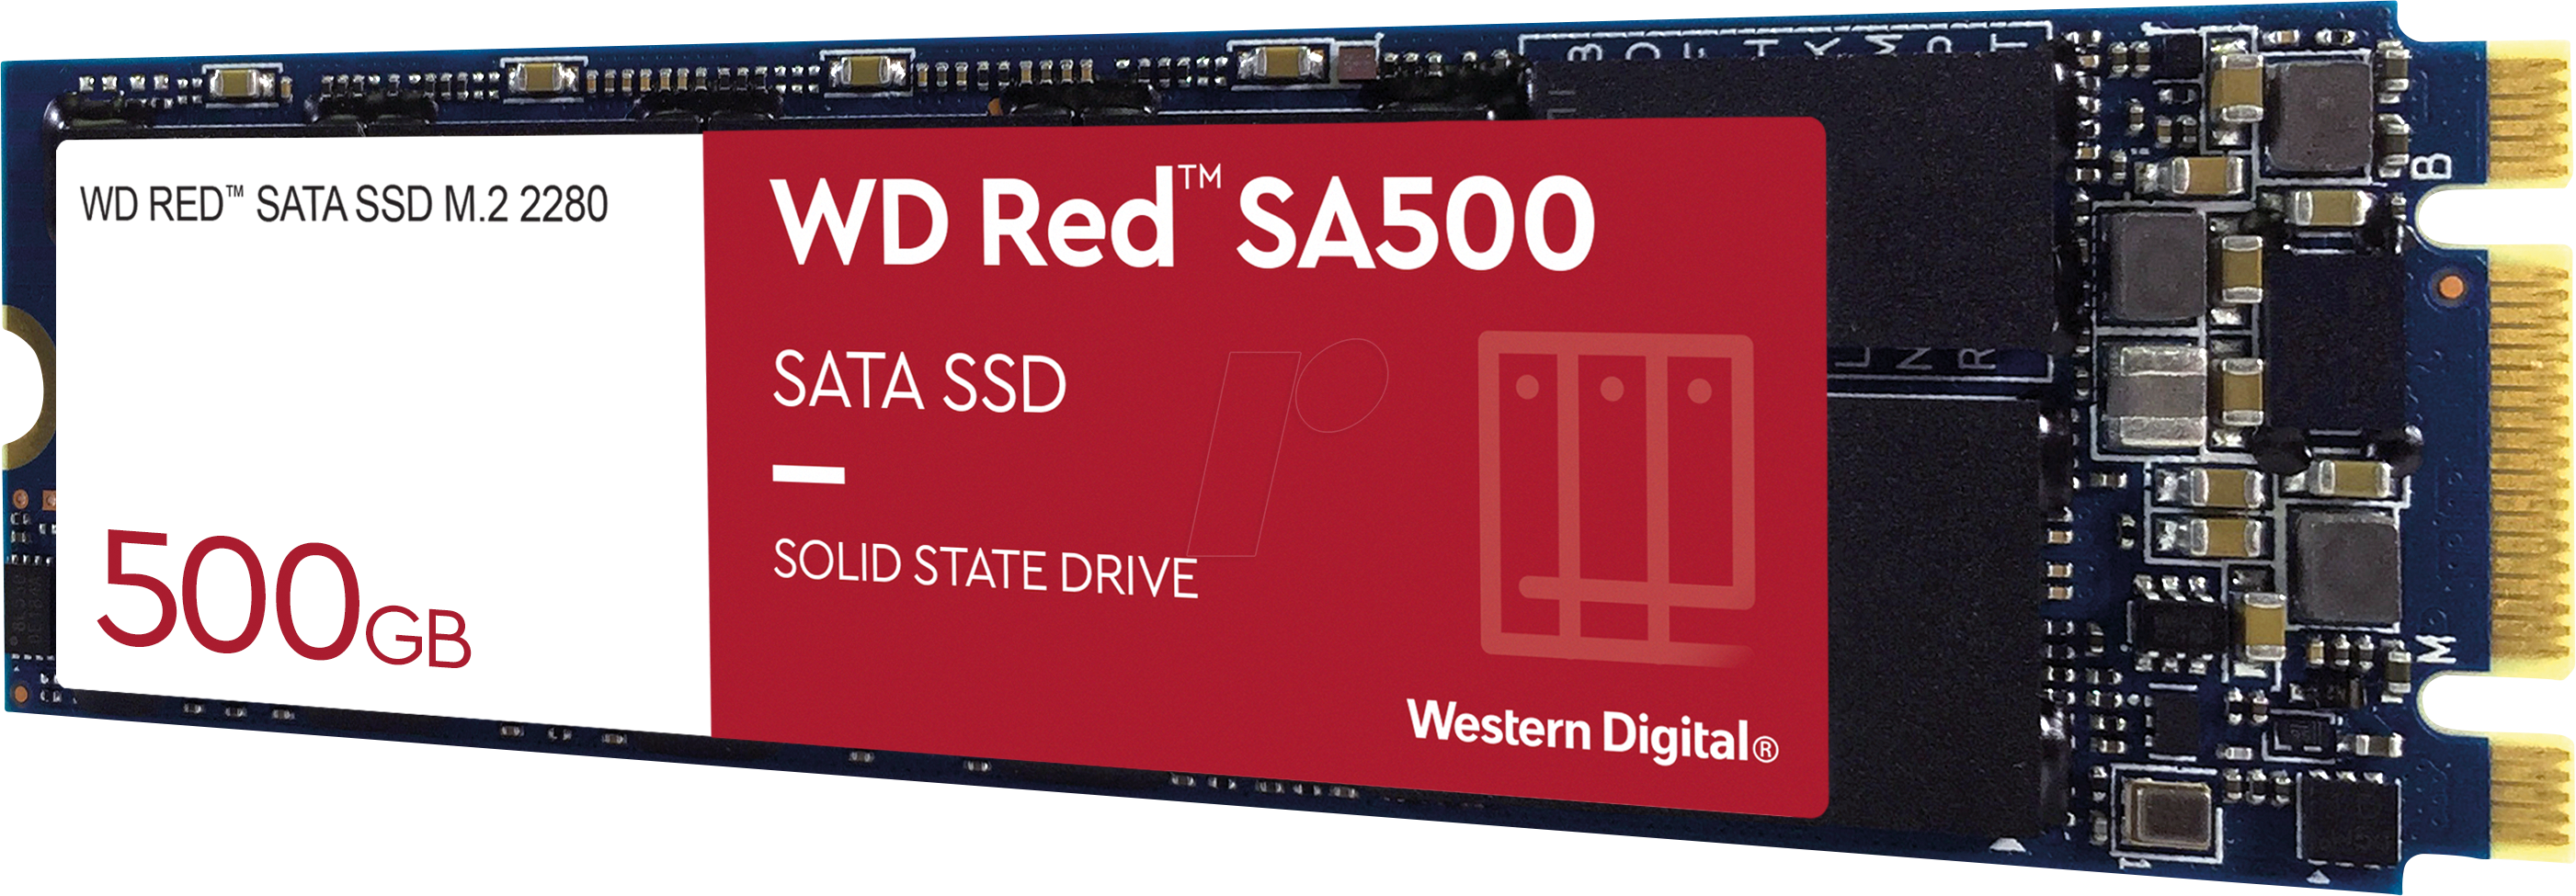 WD 500GB WD Red SA500 NAS 3D NAND Internal SSD - SATA III 6 Gb/s, M.2 2280, Up to 560 MB/s